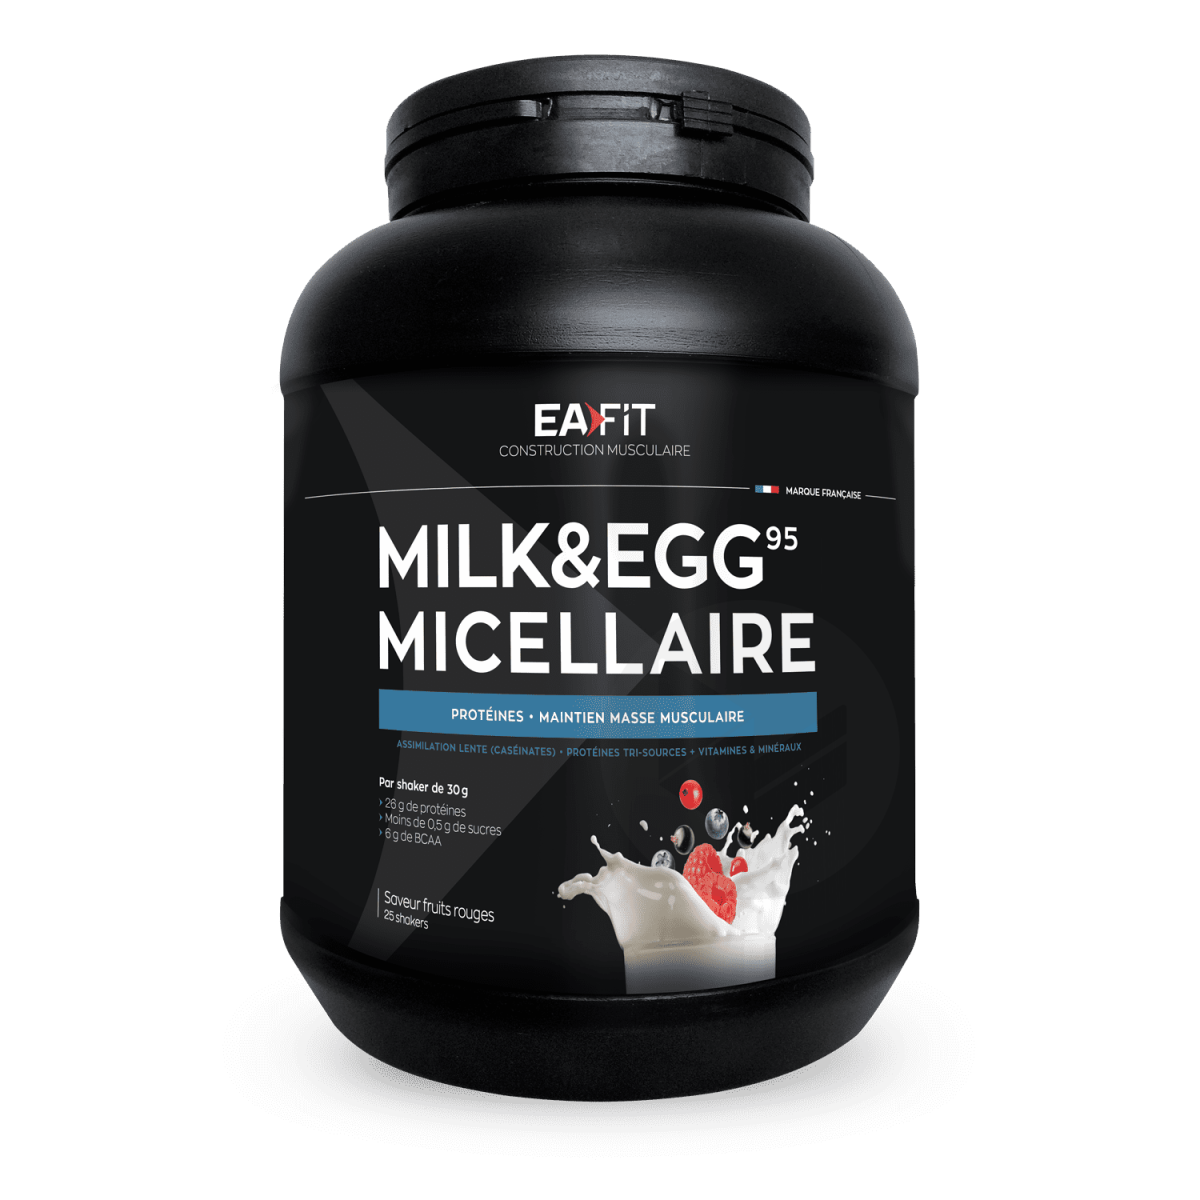 MILK & EGG 95 MICELLAIRE Fruits rouges 750 g